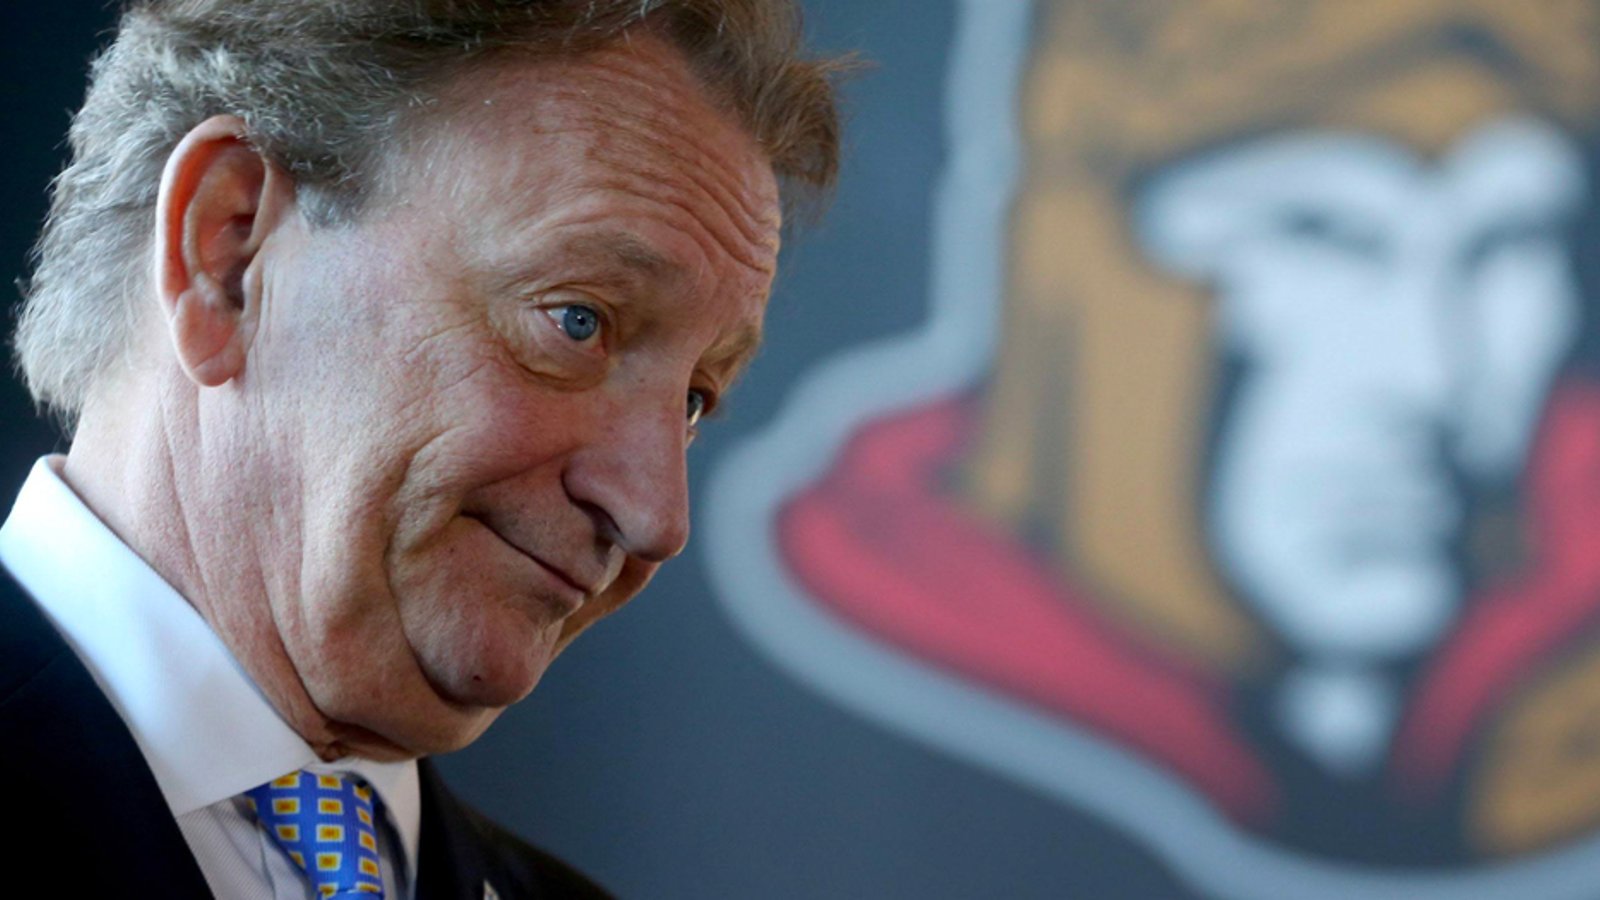 Melnyk lashes out against Sens fans in bizarre rant